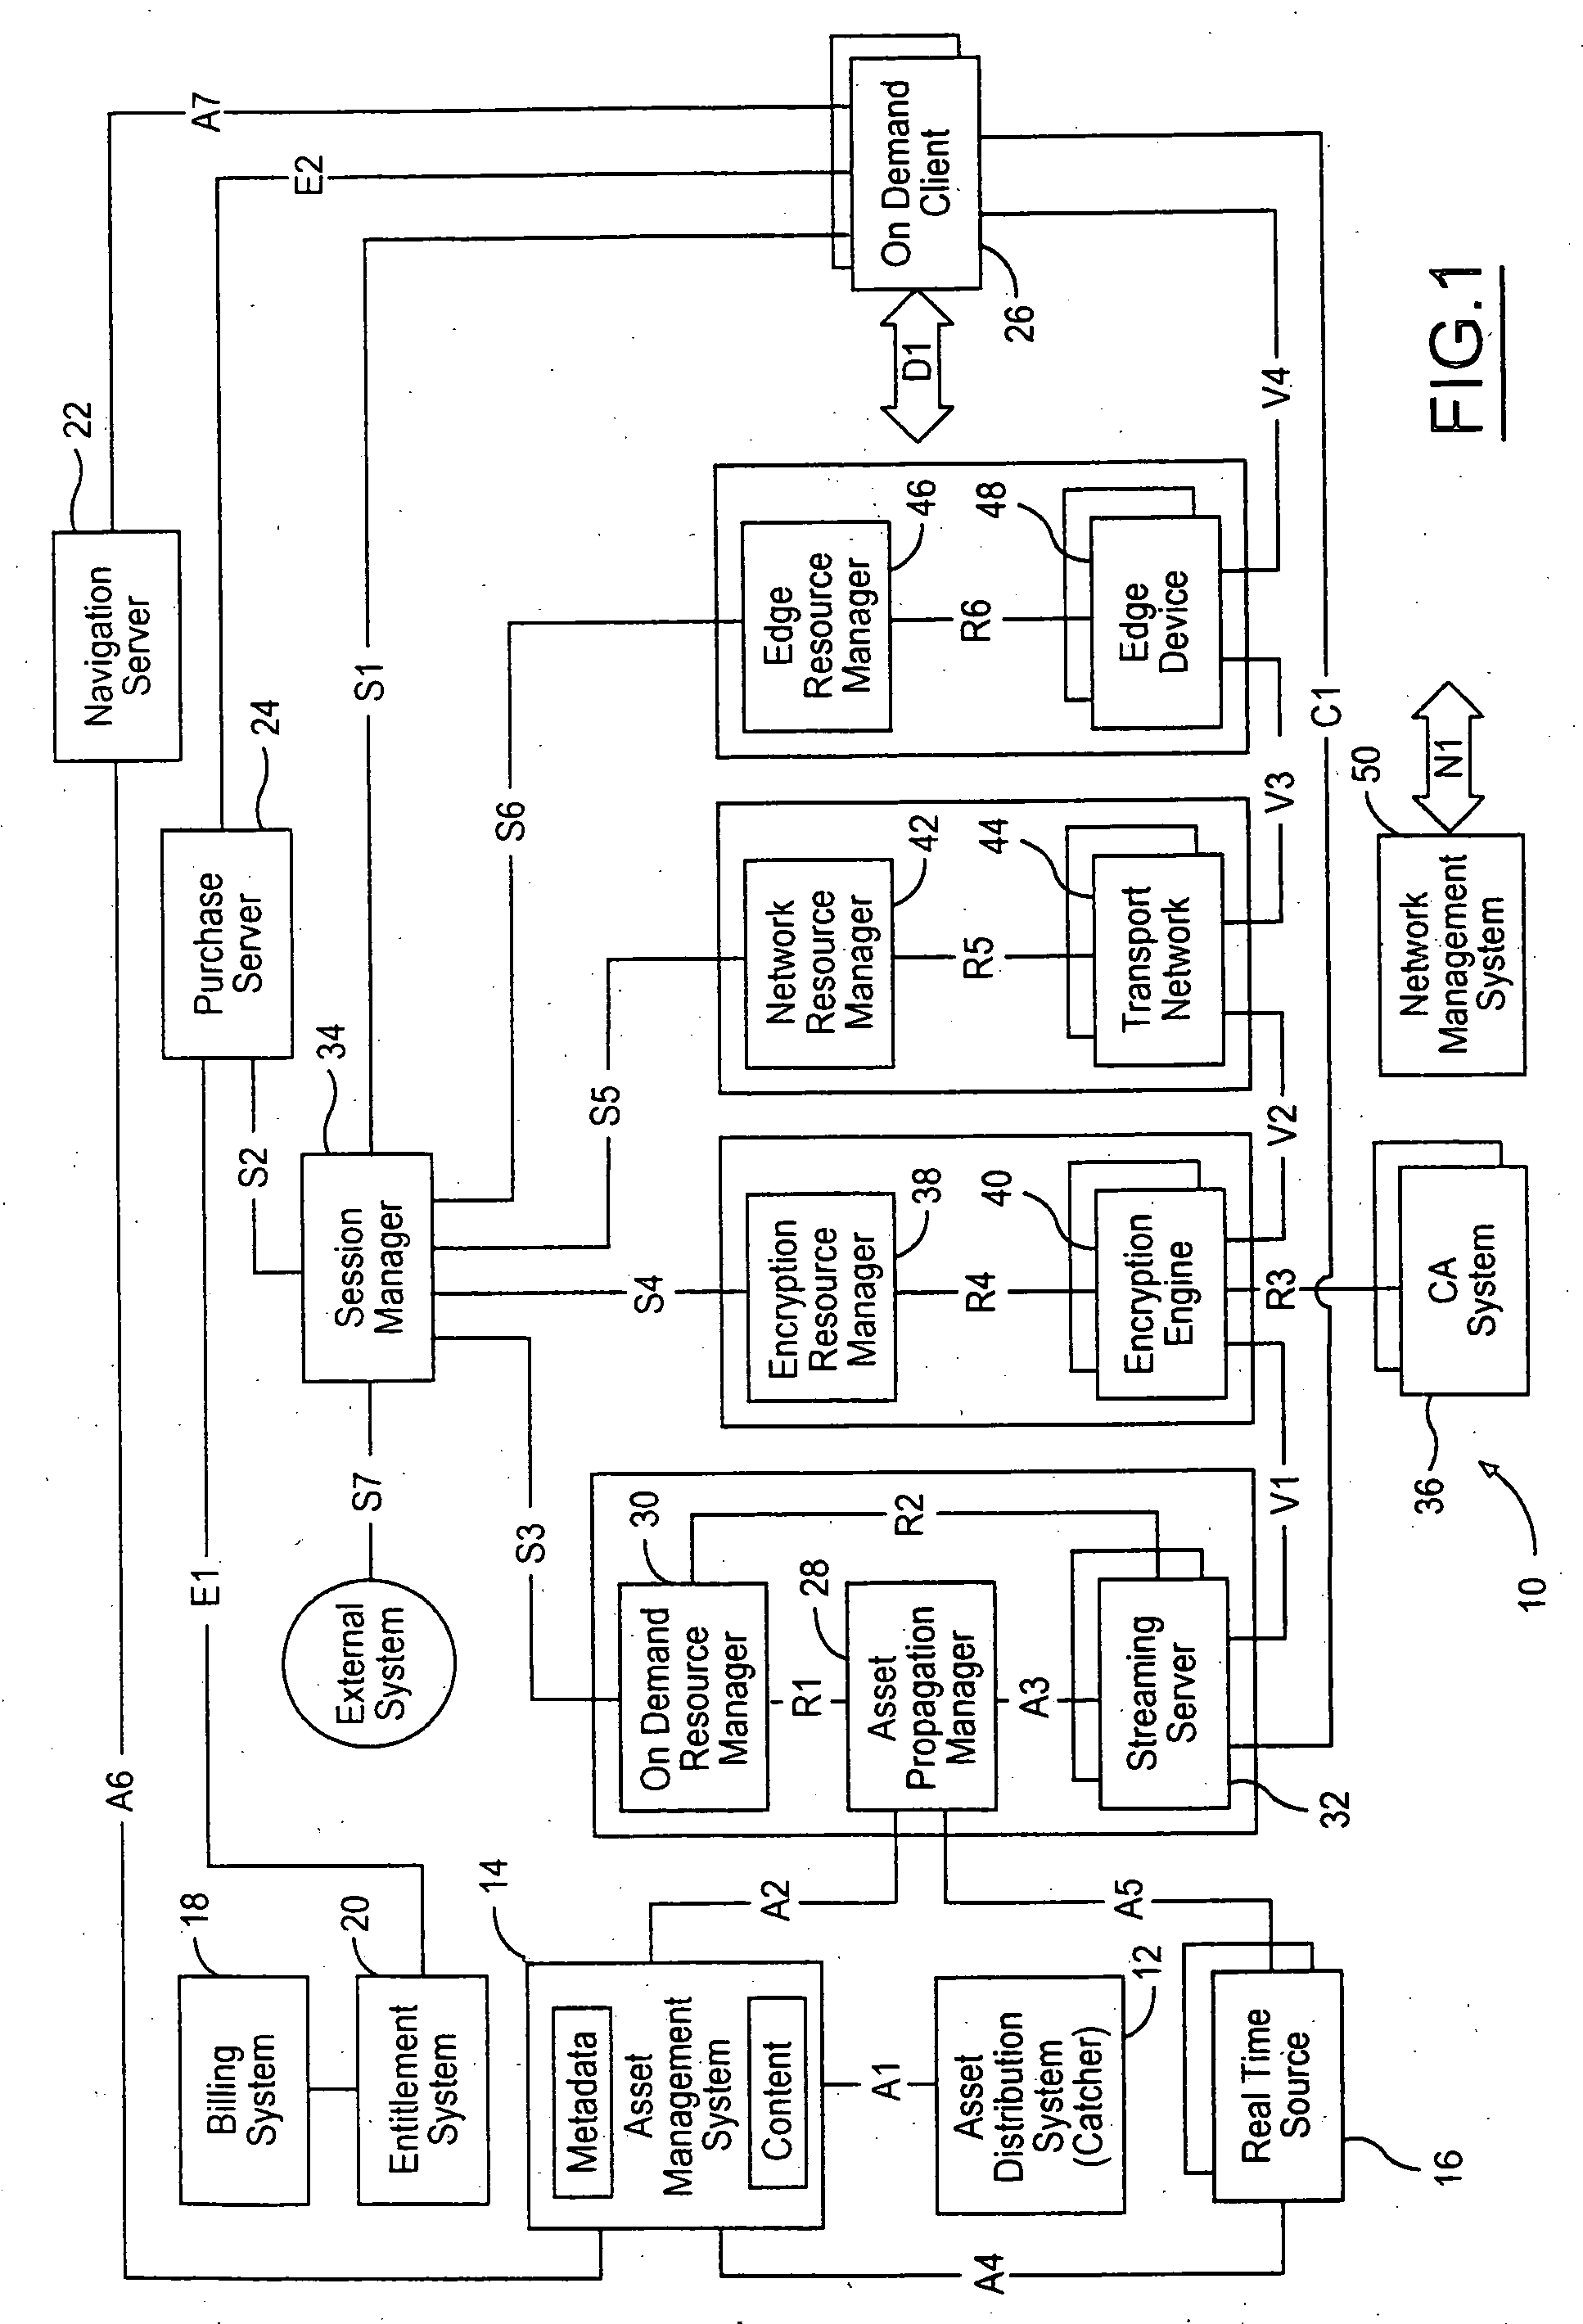 Methods and systems for using in-stream data within an on demand content delivery path